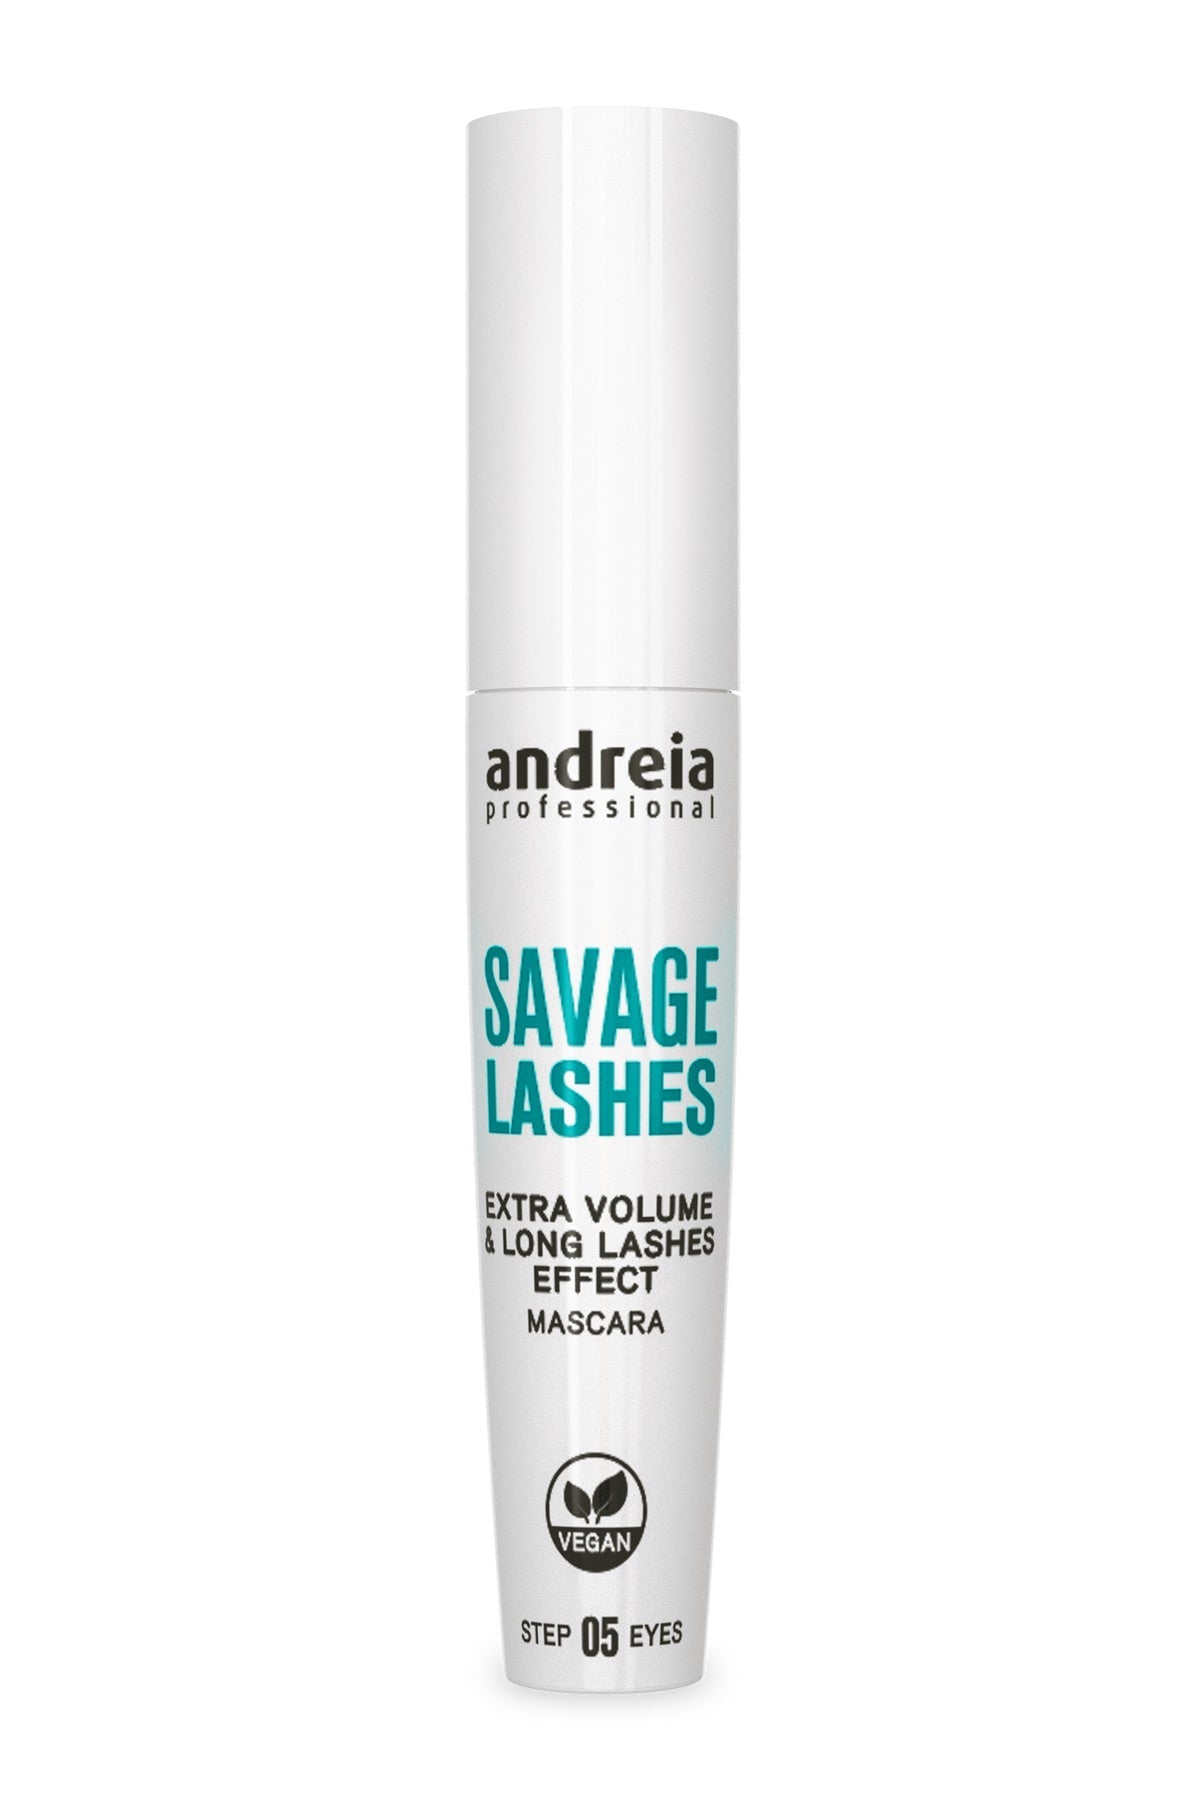 Andreia Savage Lashes - The Beauty Marque